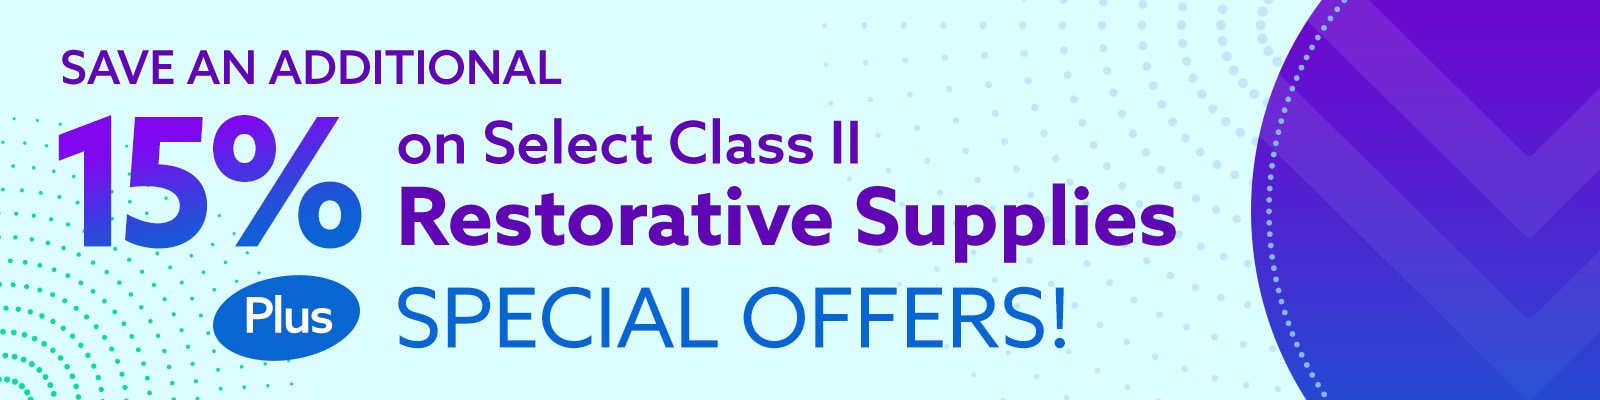 Save an Additional 15% off Select Class II Restorative Supplies, PLUS Special Offers